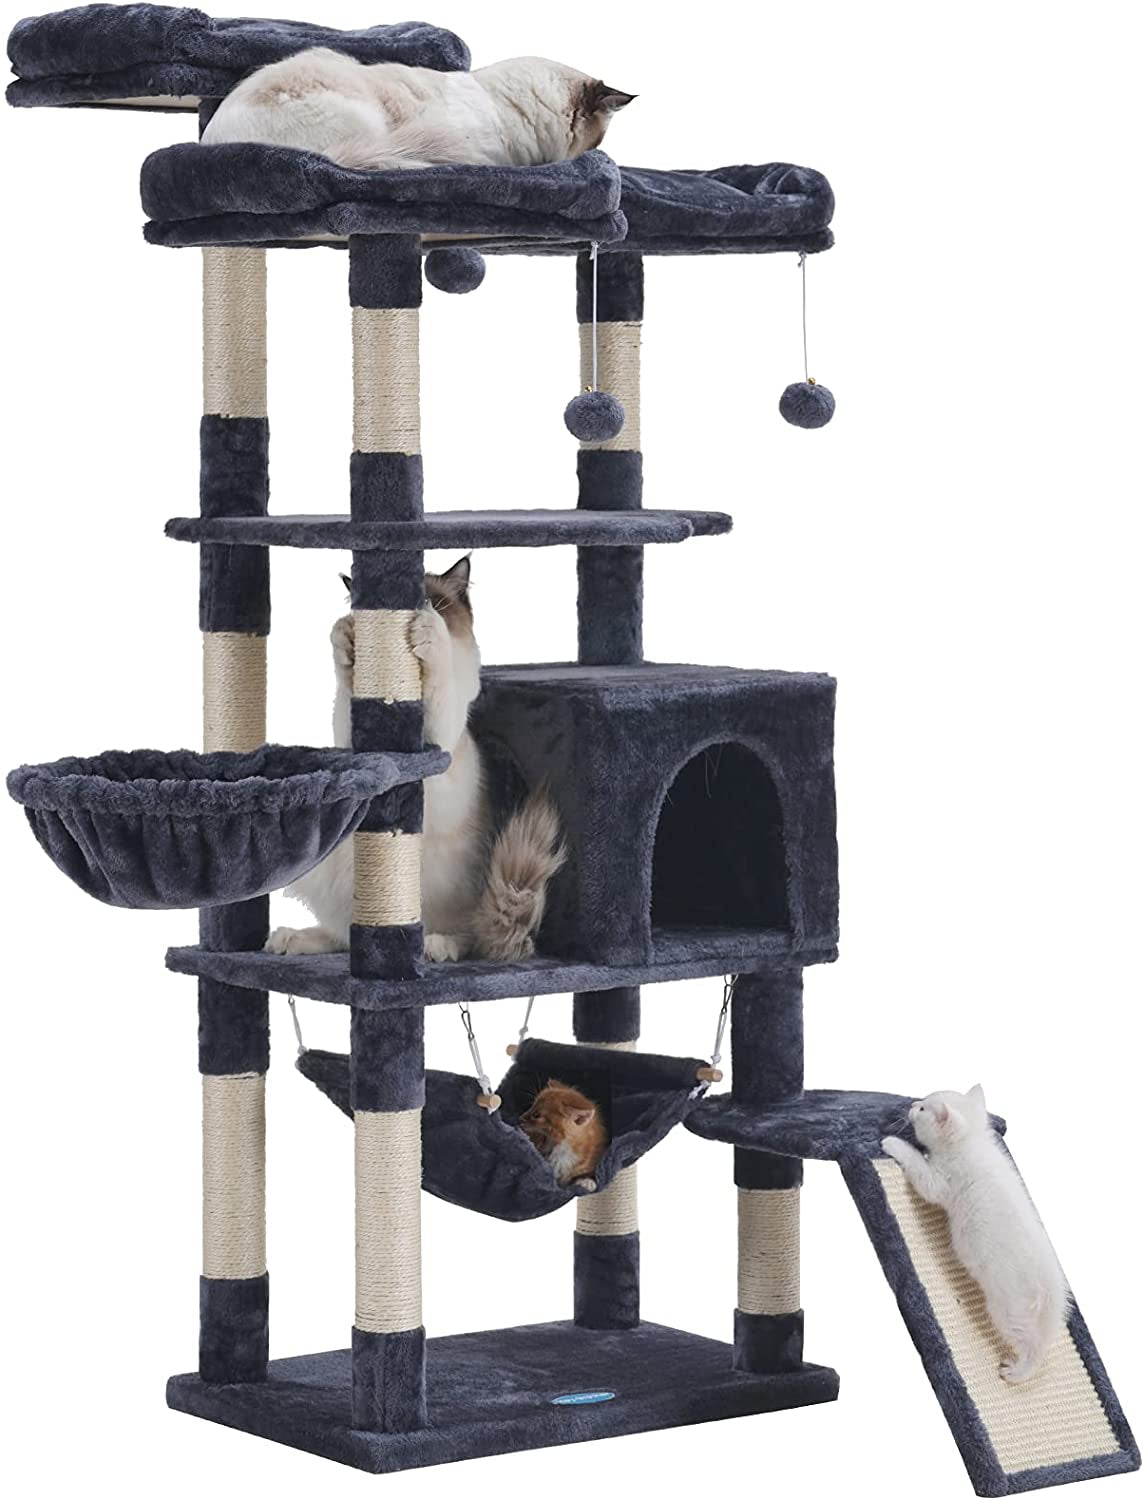 Smoky Gray Multi-Level Cat Tower with Spacious Hammock, 3 Cozy Perches, and Scratching Posts - Stable Structure for Kittens and Large Cats